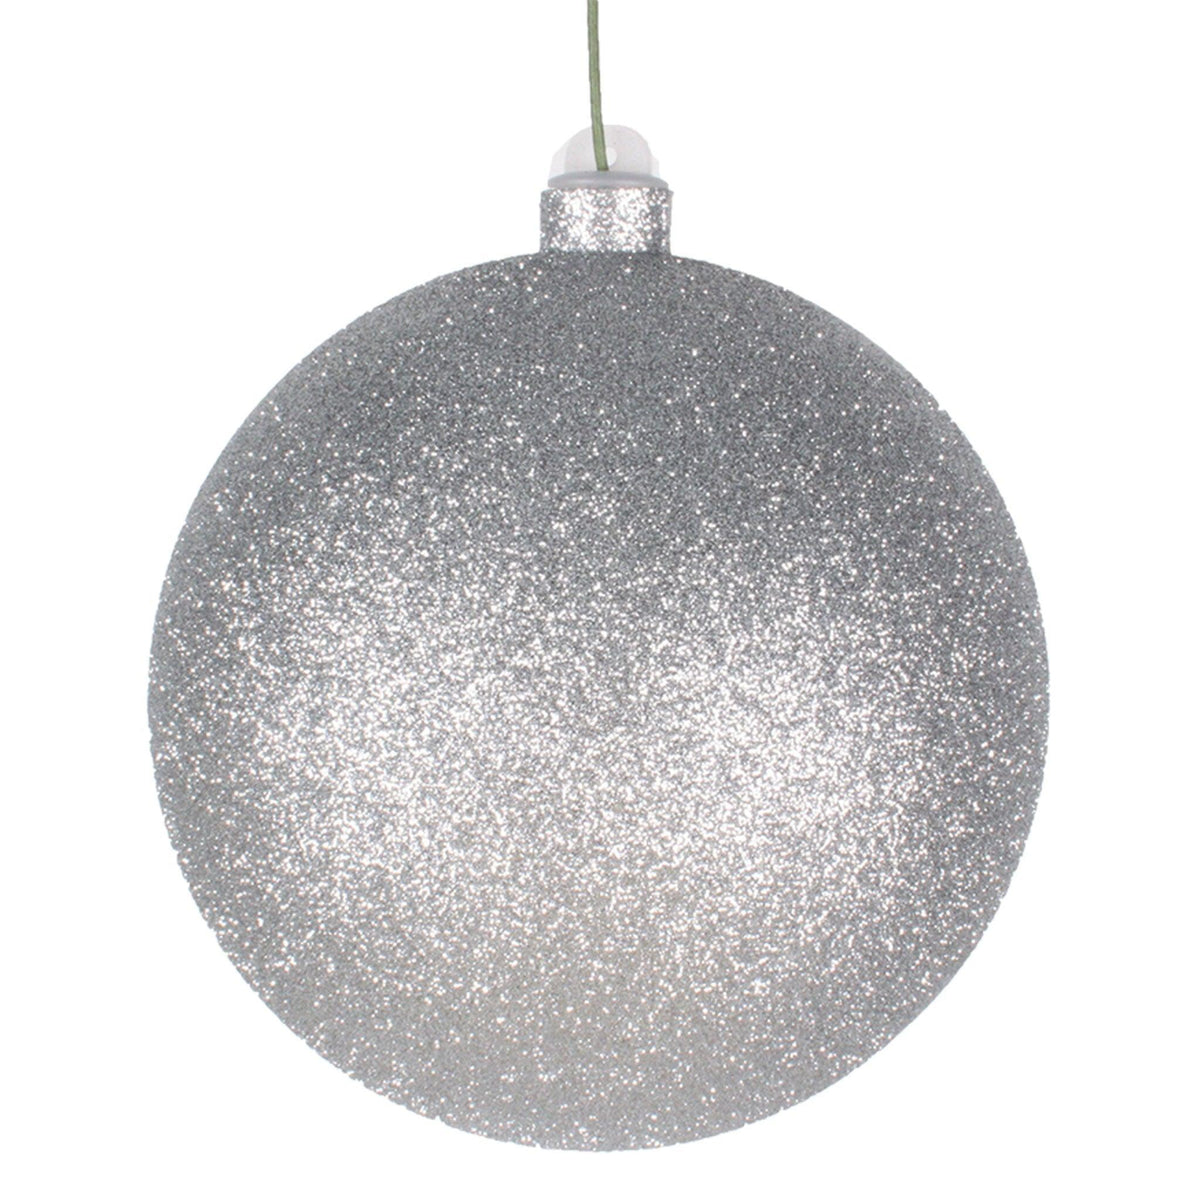 Lee Display offers brand new Shiny Glitter Silver Plastic Ball Ornaments at wholesale prices for affordable Christmas Tree Hanging and Holiday Decorating on sale at leedisplay.com